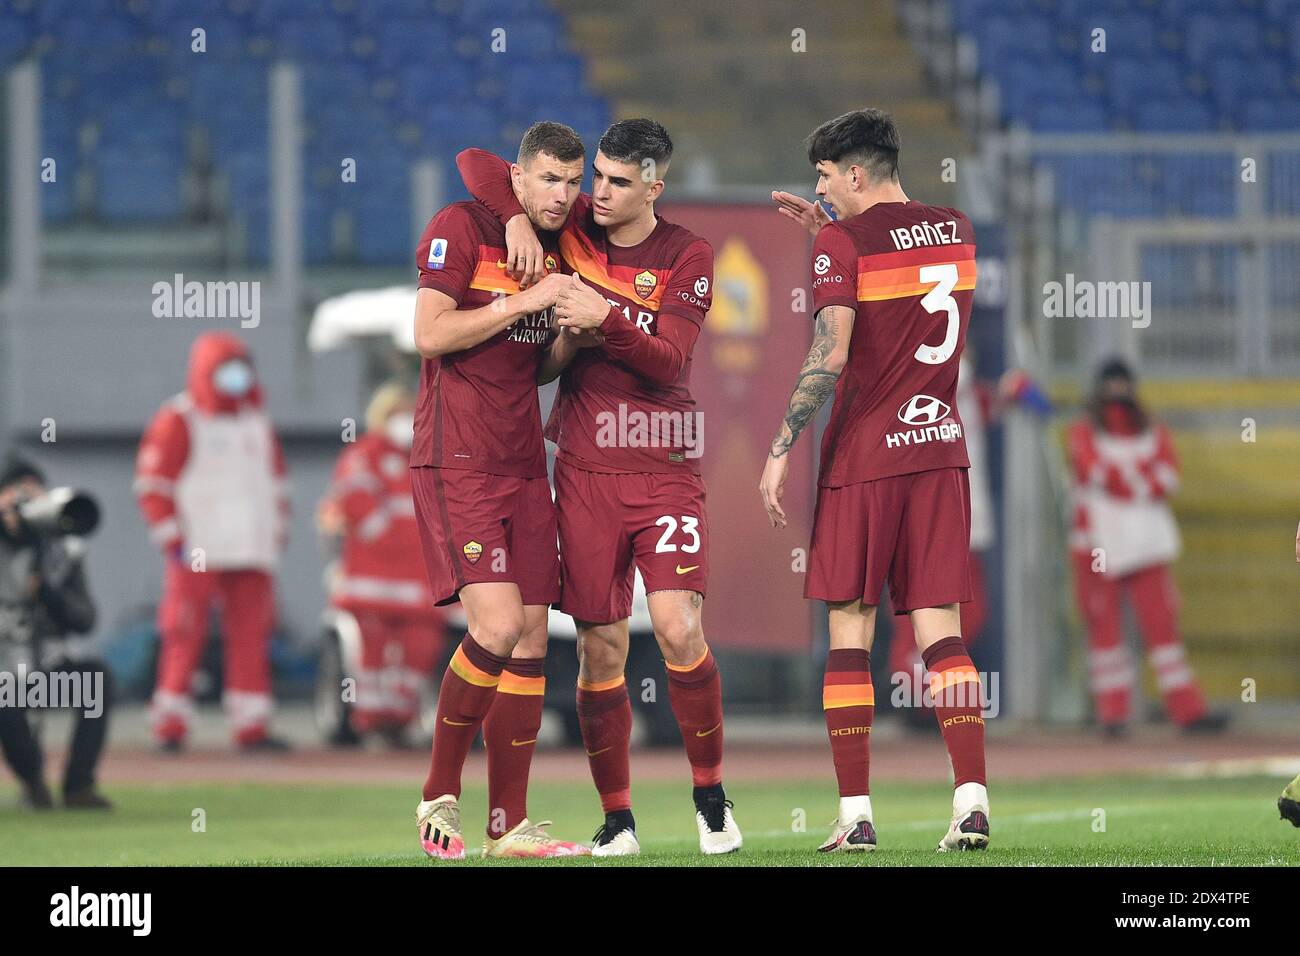 Rome, Italy. 23rd Dec, 2020. ROME, ITALY - December 23 : Edin Dzeko (L ) of AS Roma celebrates with his Gialluca Mancini (C) after scoring a goal during Italian Serie A soccer match between AS Roma and Cagliari at Stadio Olimpico on December 23, 2020 in Rome Italy /LM Credit: Claudio Pasquazi/LPS/ZUMA Wire/Alamy Live News Stock Photo